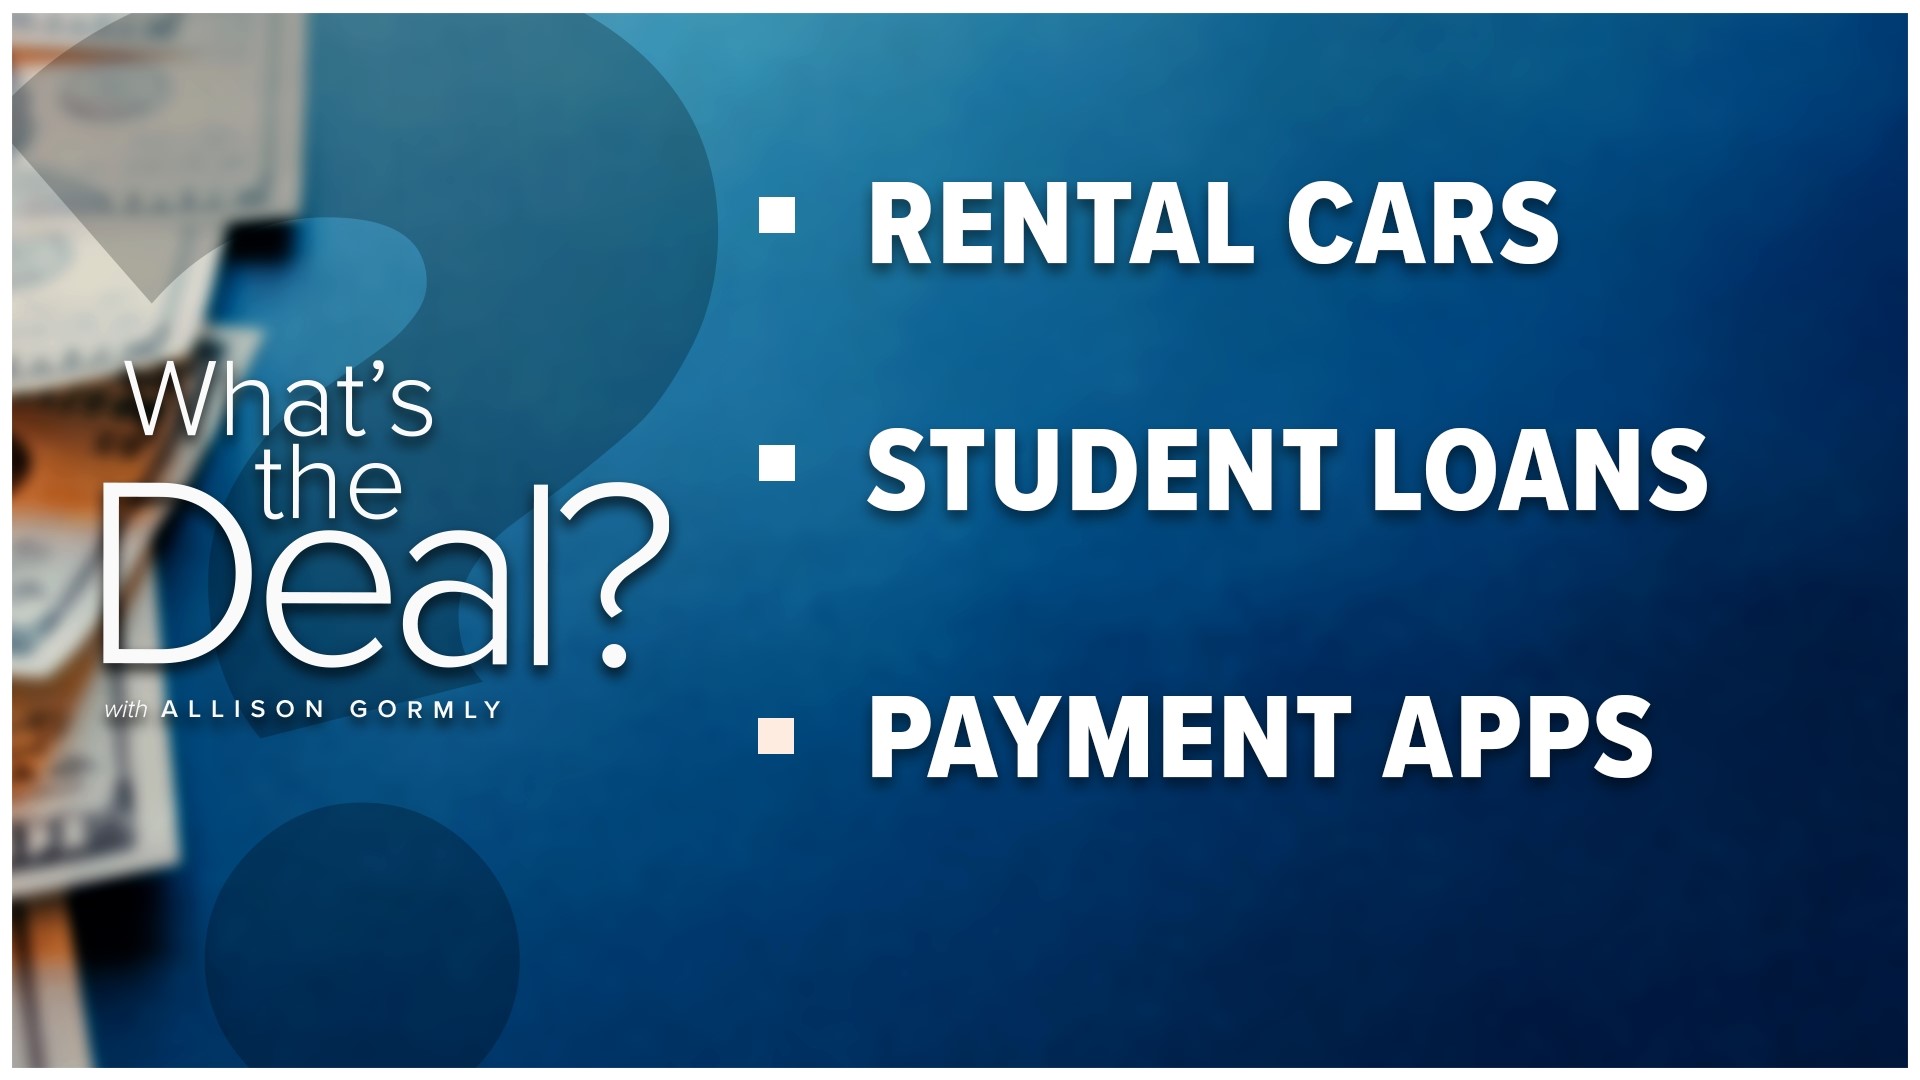 What's the deal with federal student loan payments and the dates to know, as well as finding the best price for rental cars and more.